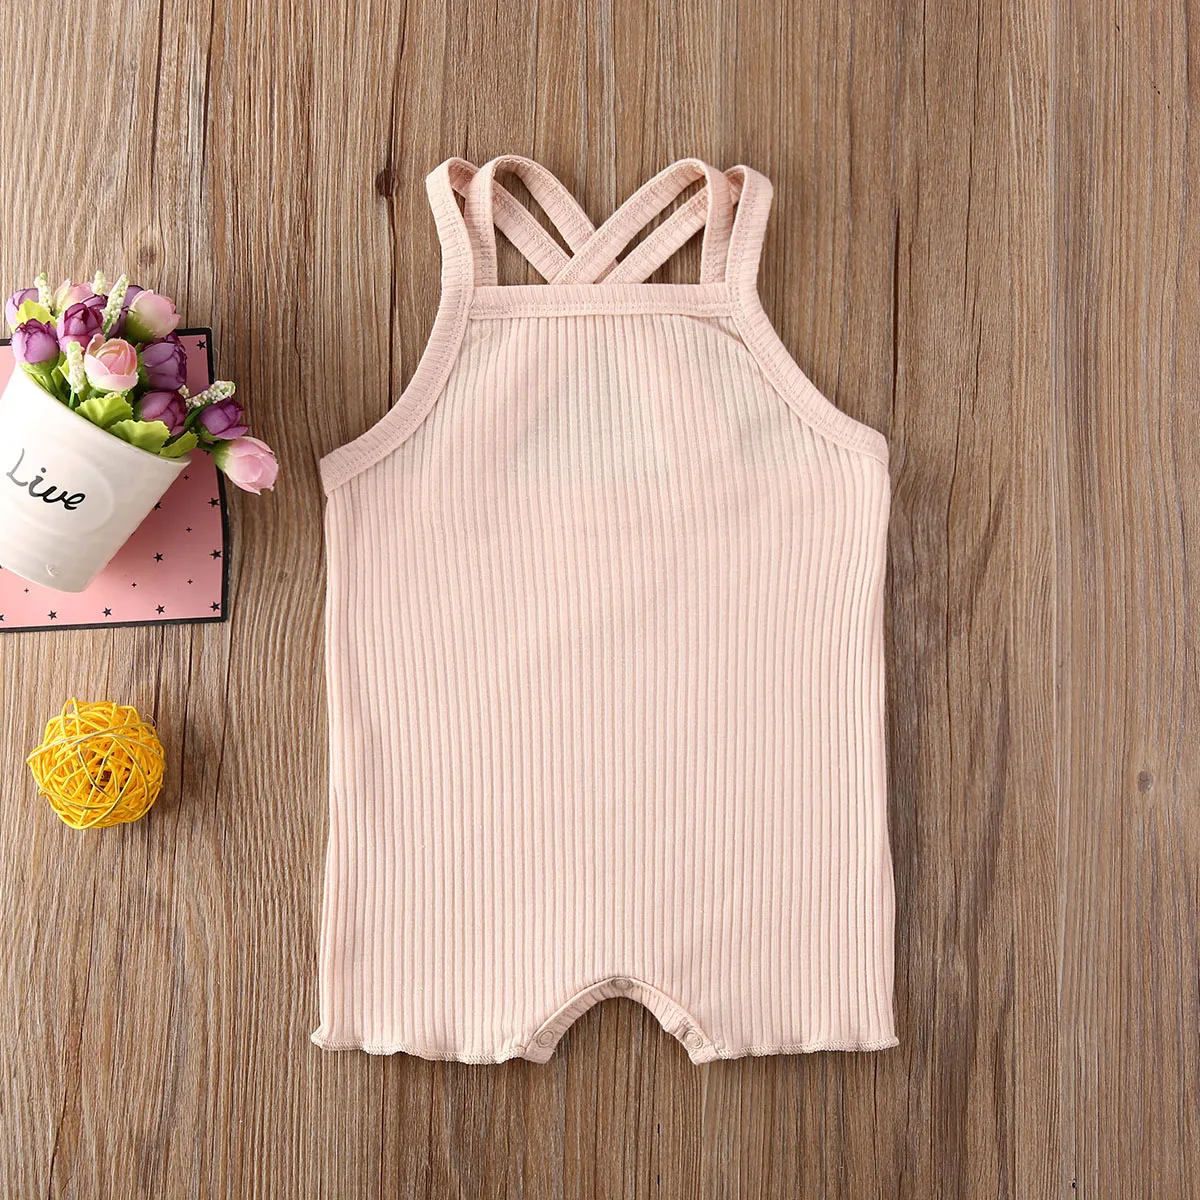 2020 Baby Summer Clothing Baby Kids Boy Girl Infant Romper Jumpsuit Cotton Outfits Set Ribbed Solid Clothes Baby Bodysuits comfotable